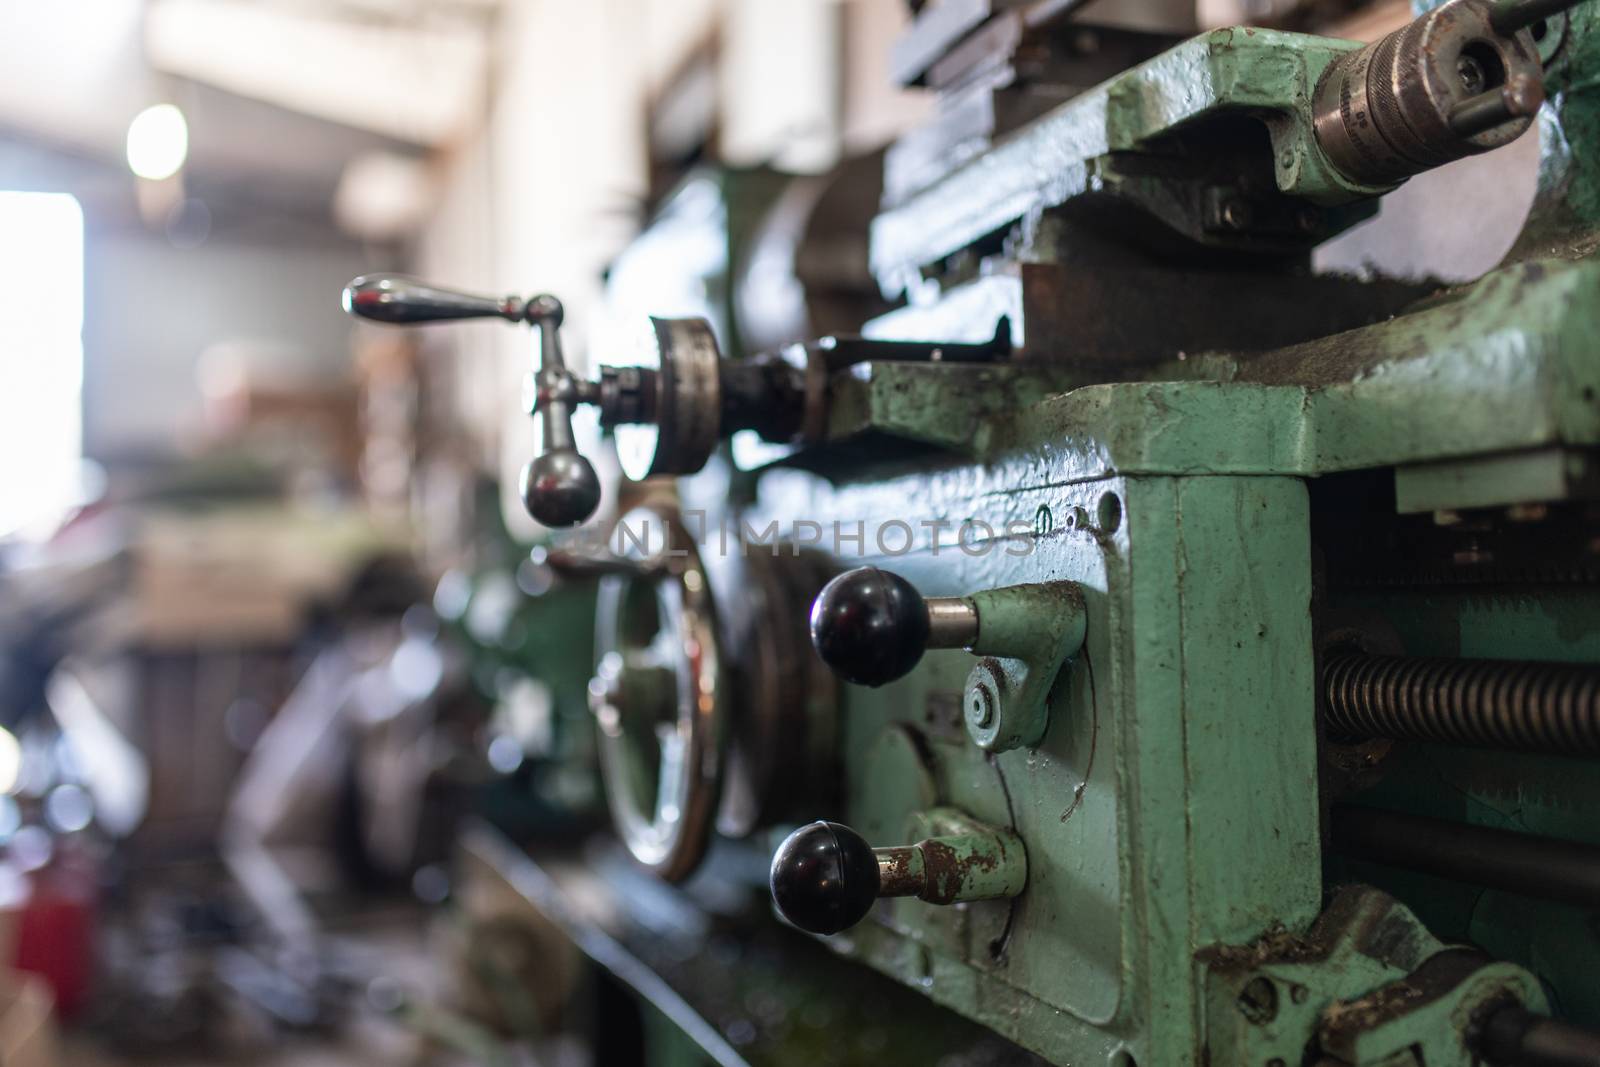 The old lathe machine is painted green.  by alexsdriver